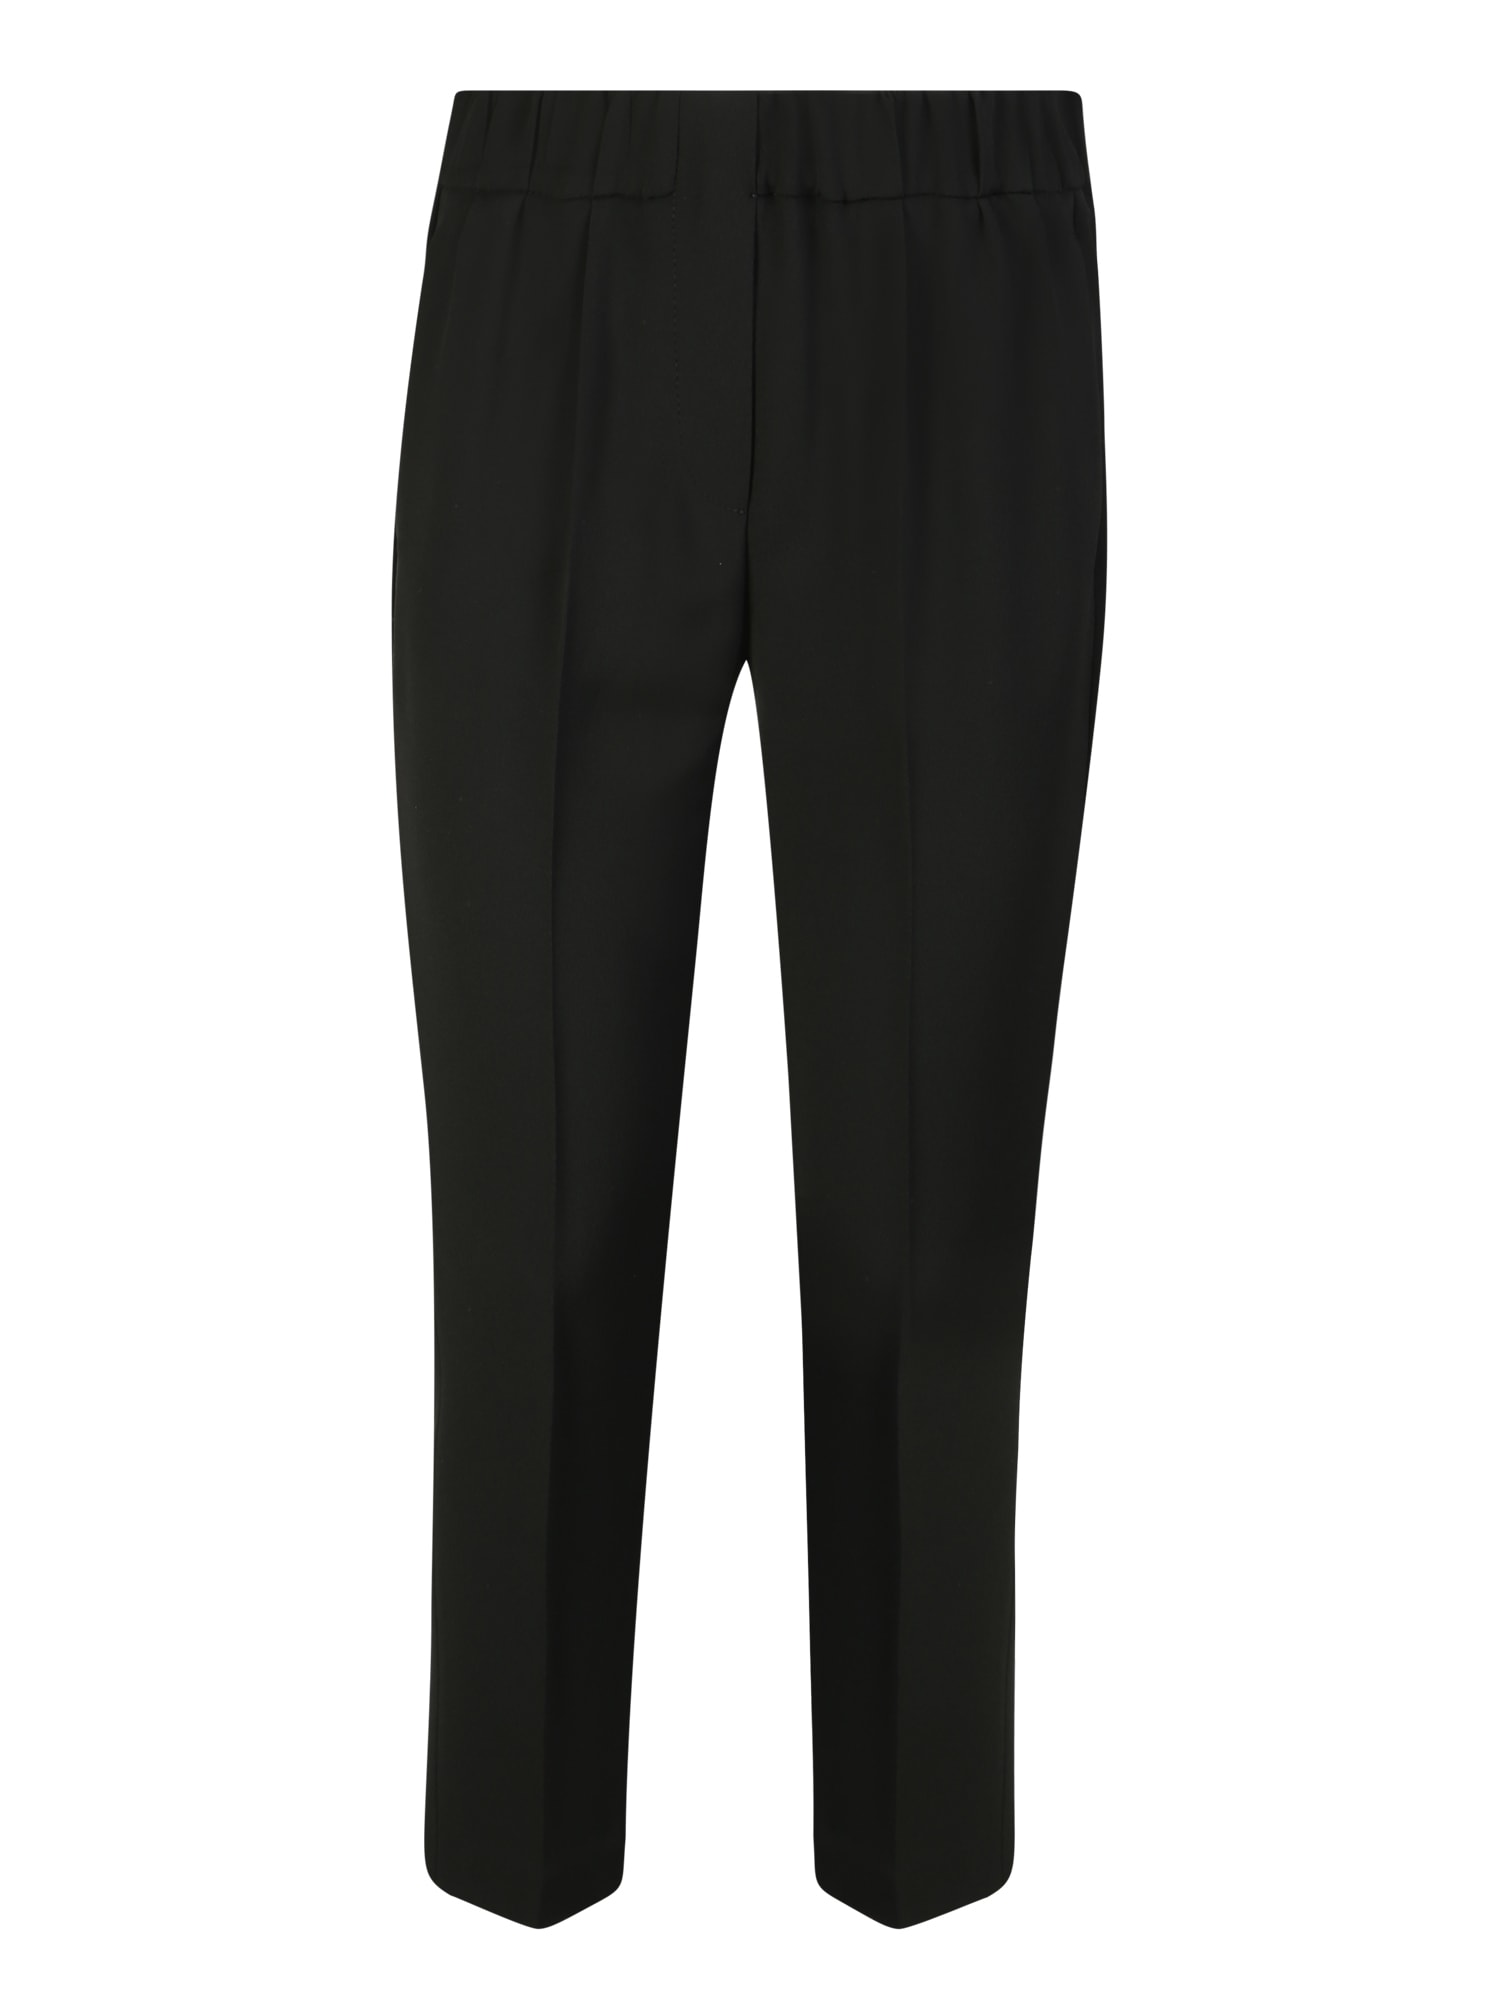 Brunello Cucinellis Straight Silk Blend Pants Are Classic And Essential